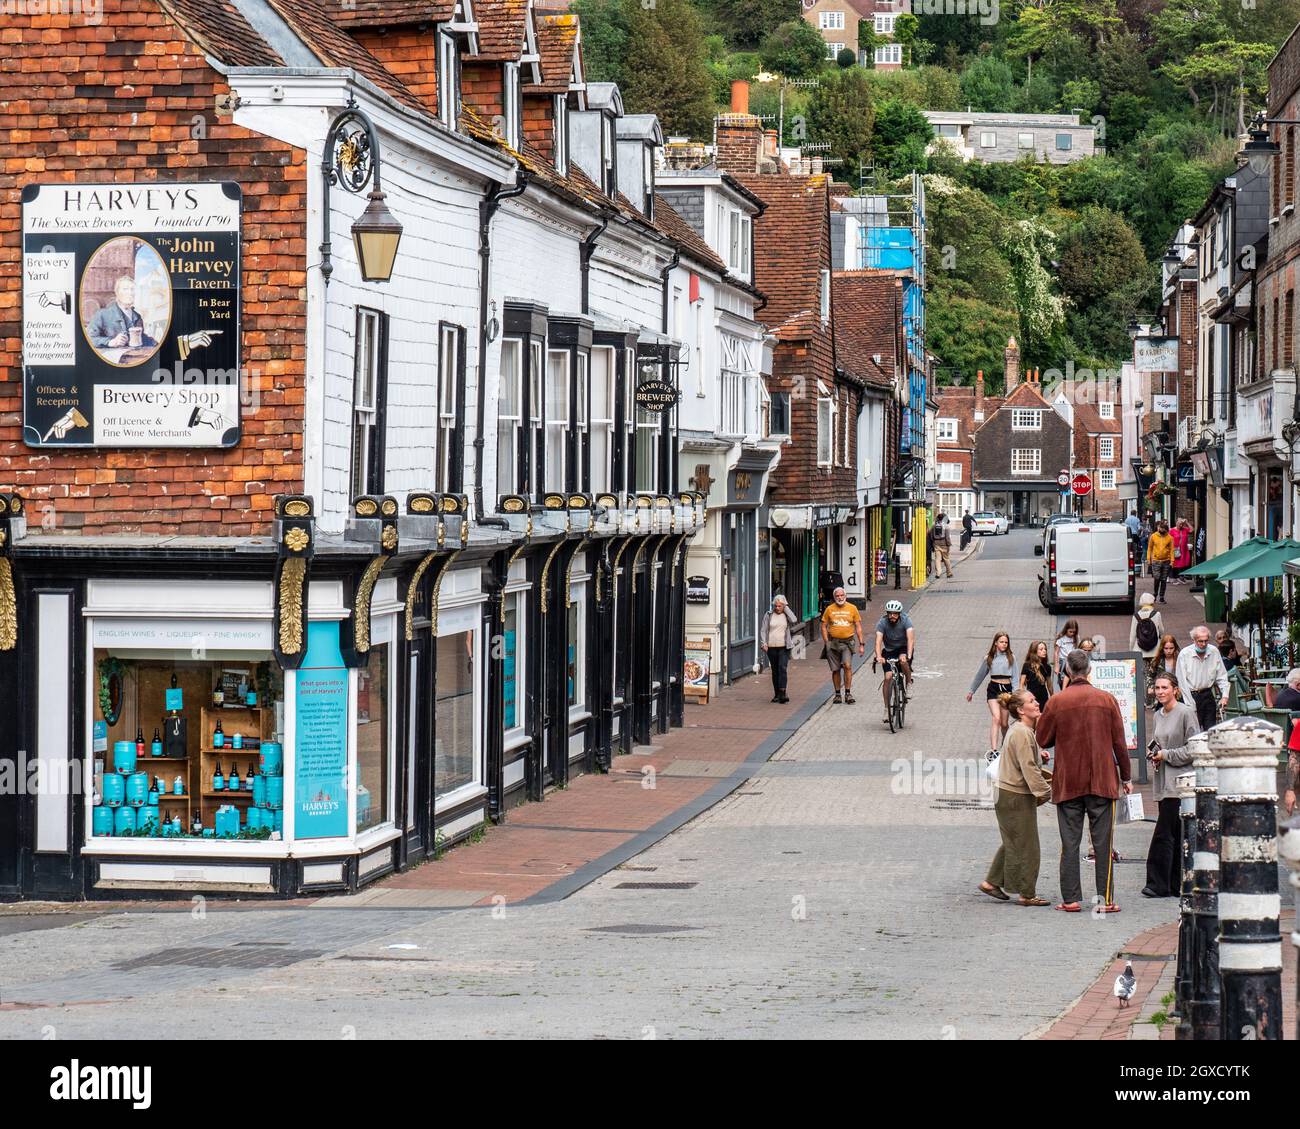 High Street, Lewes, East Sussex, England. The main shopping street in the Cliffe area of Lewes with focus on the local Harvey's Brewery shop. Stock Photo